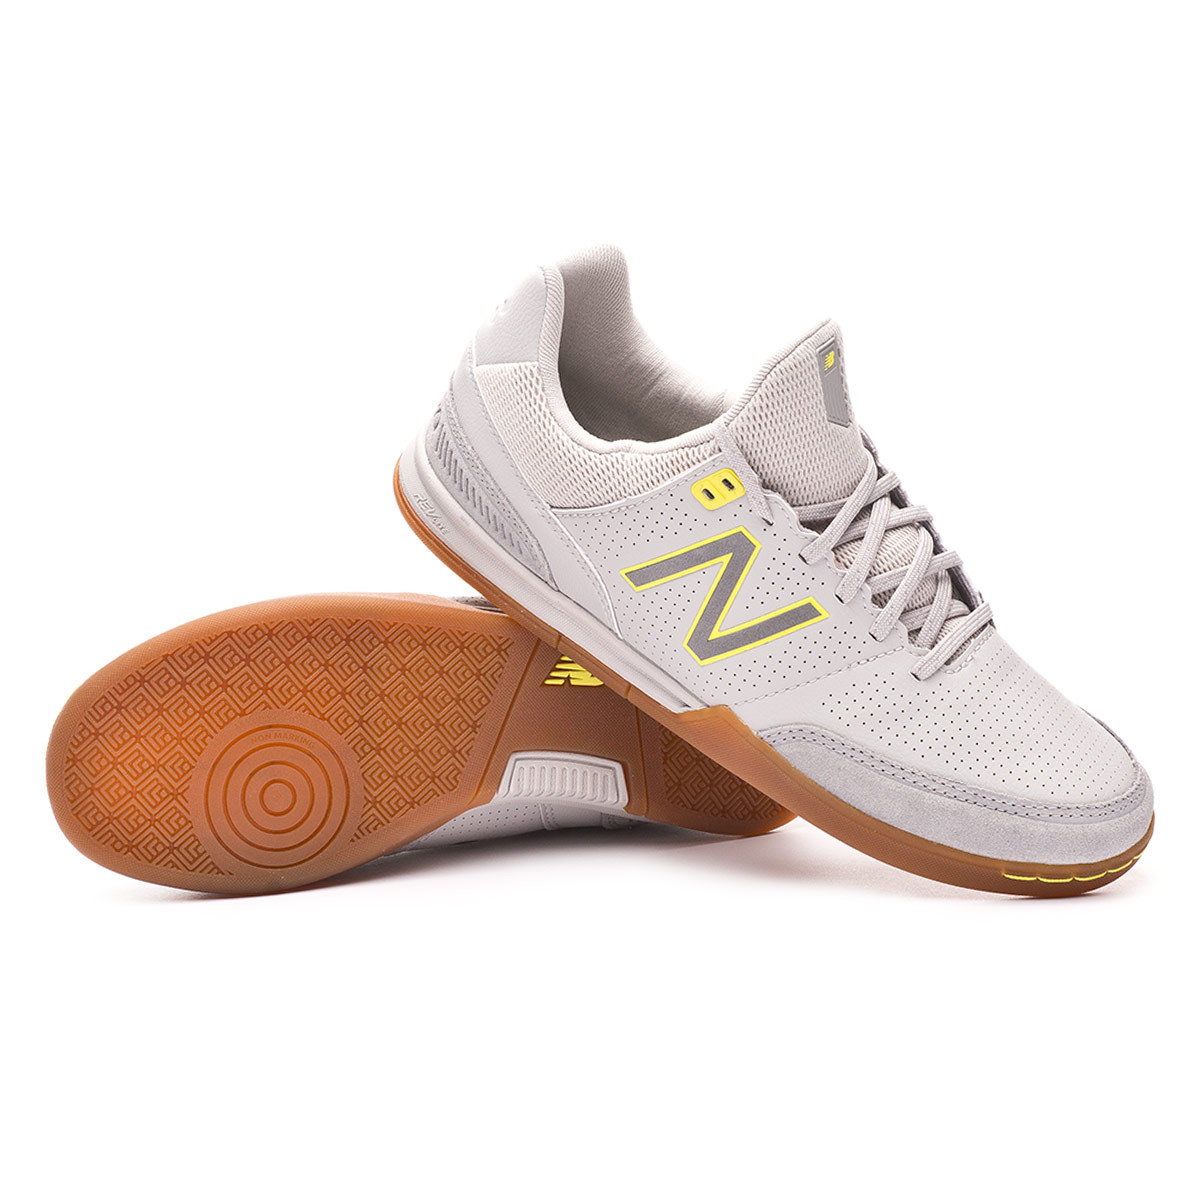 New Balance Audazo Outlet Store, UP TO 57% OFF